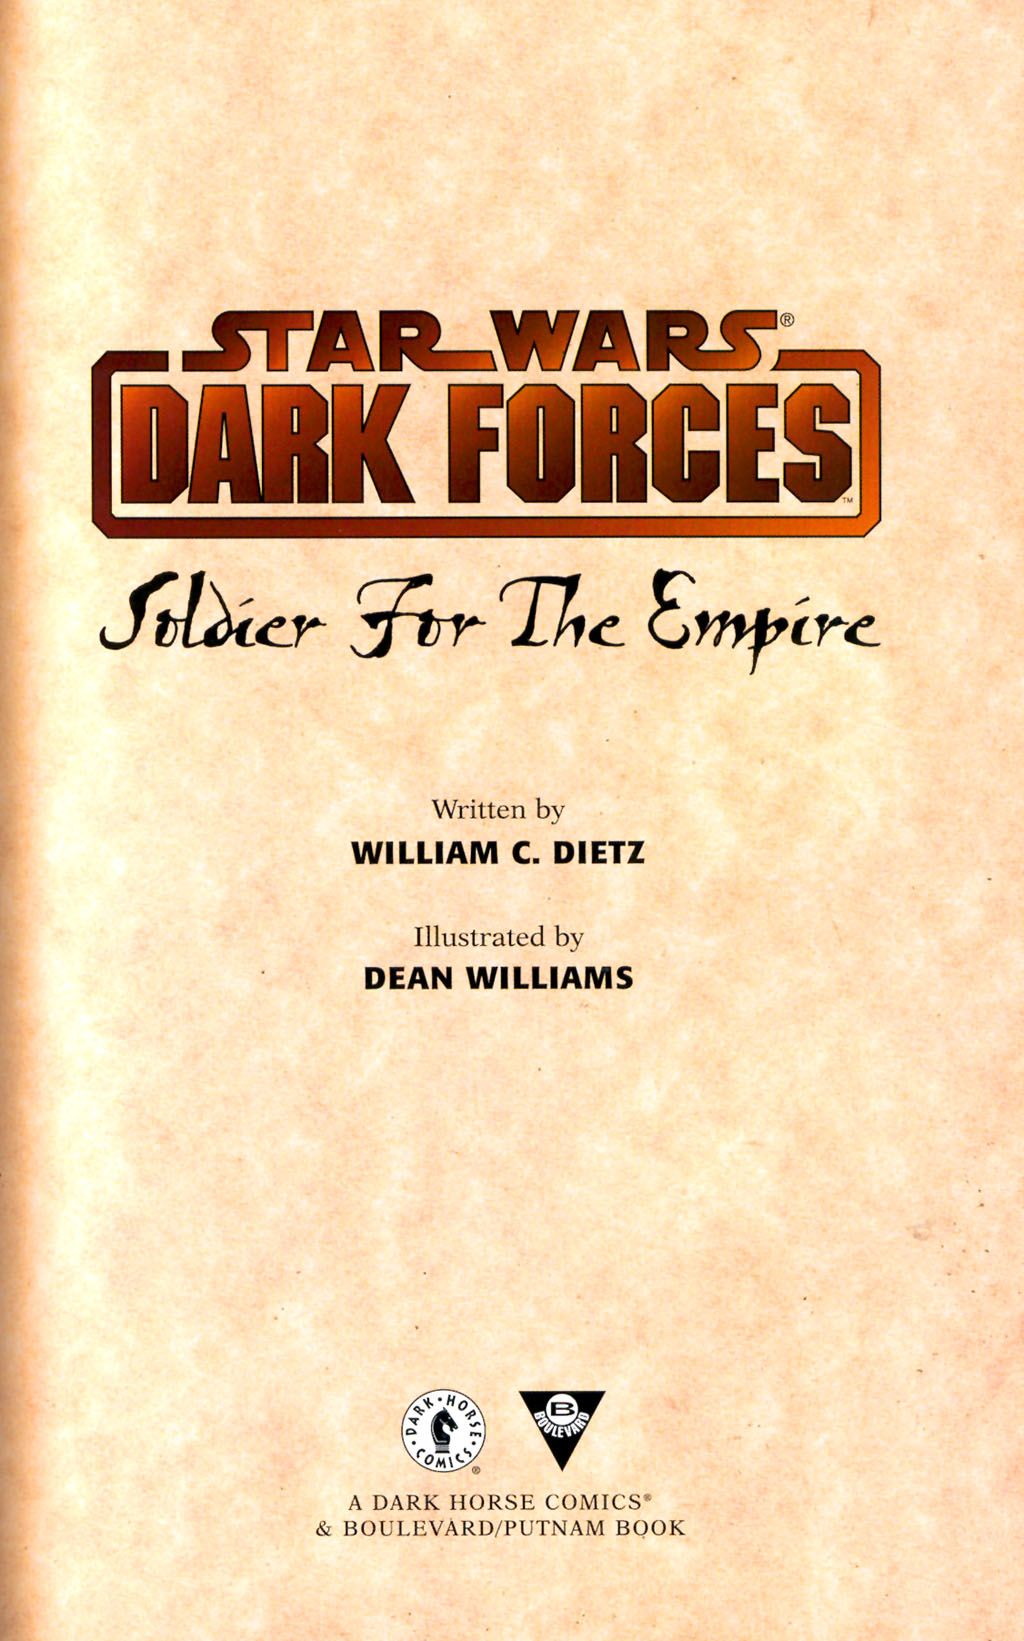 Read online Star Wars: Dark Forces comic -  Issue # TPB Soldier for the Empire - 3